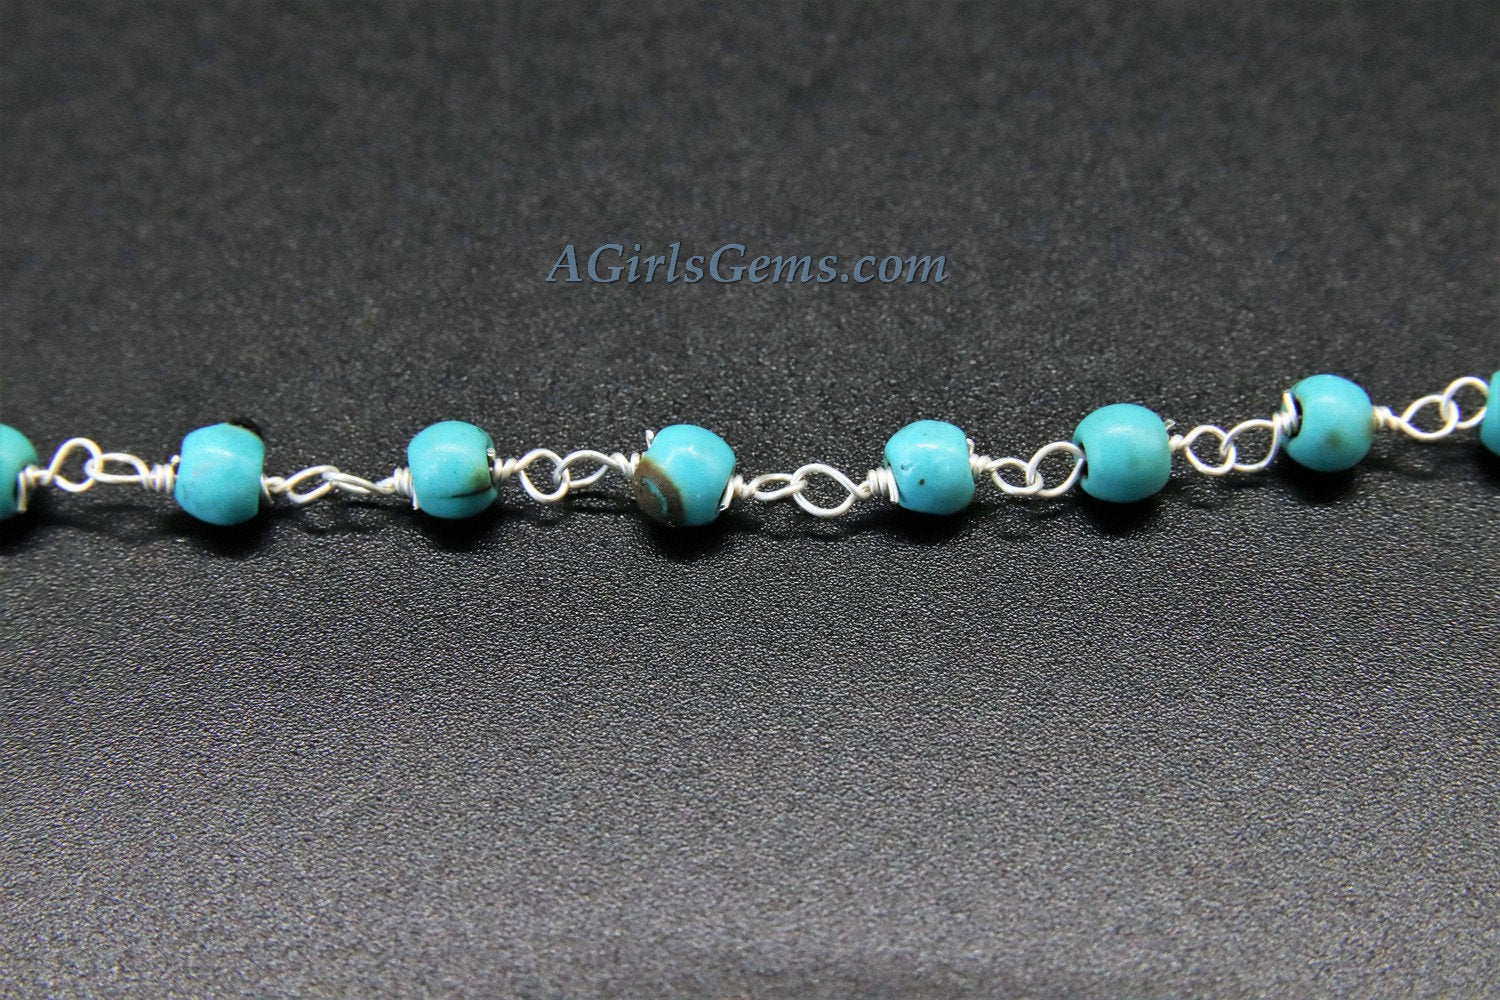 4 mm Wire Wrapped Silver plated Blue Howlite Chain for Necklace Chains - A Girls Gems